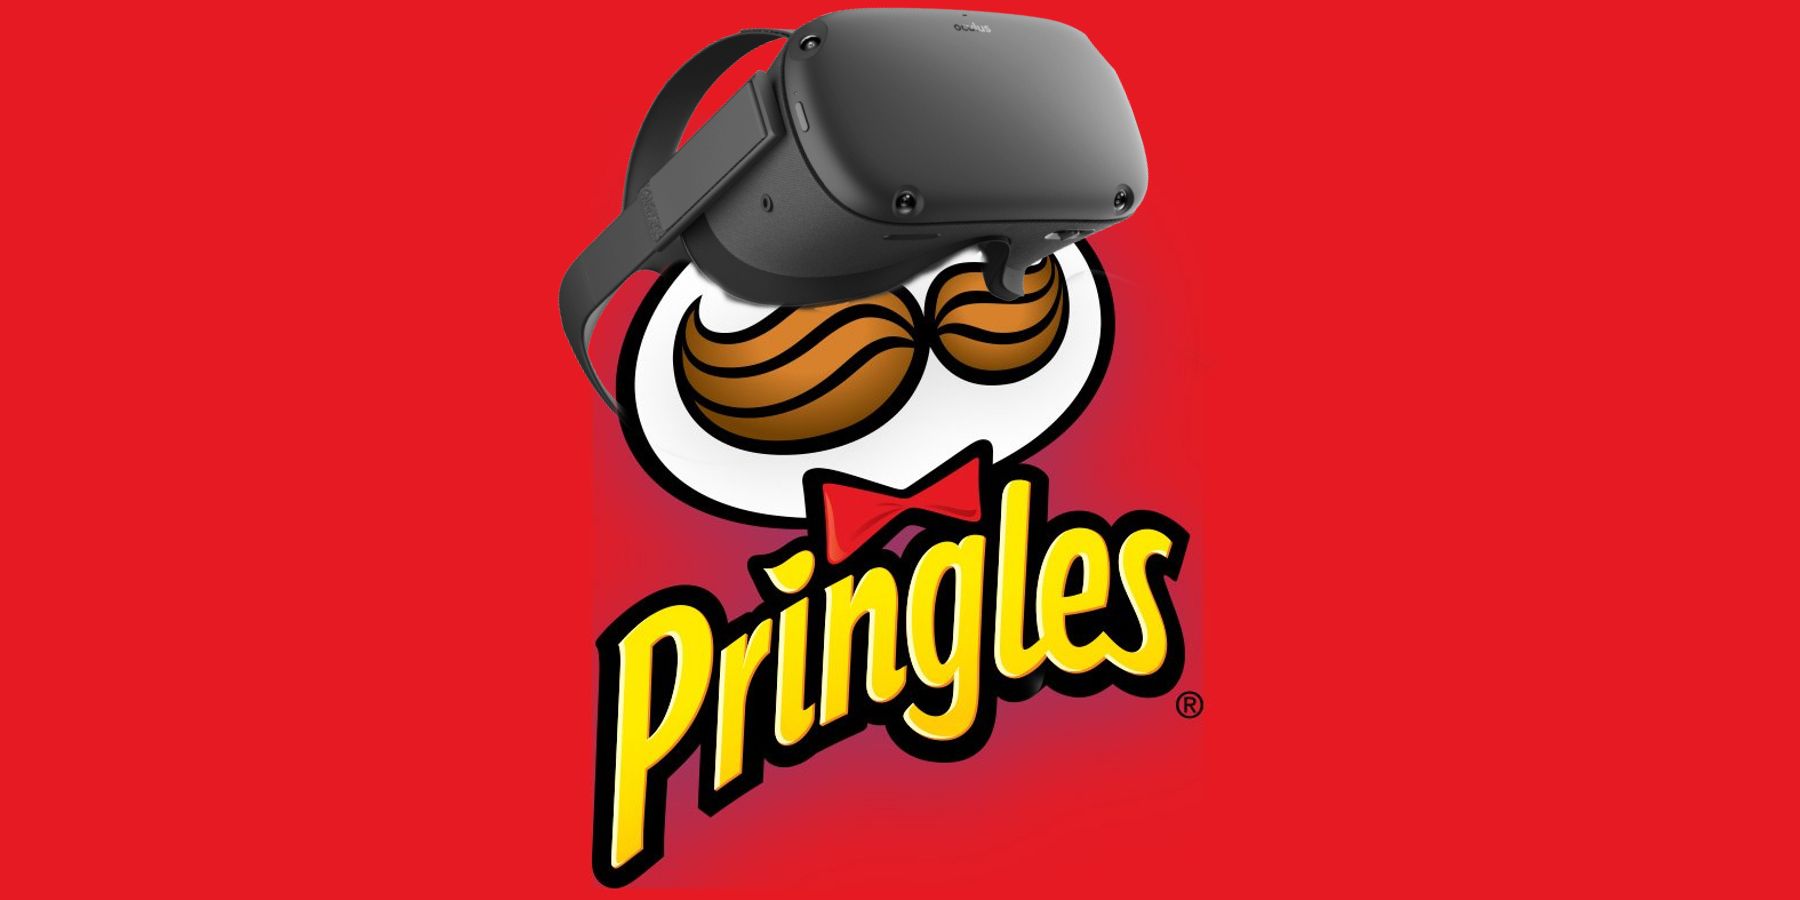 Pringles VR Headset Feature